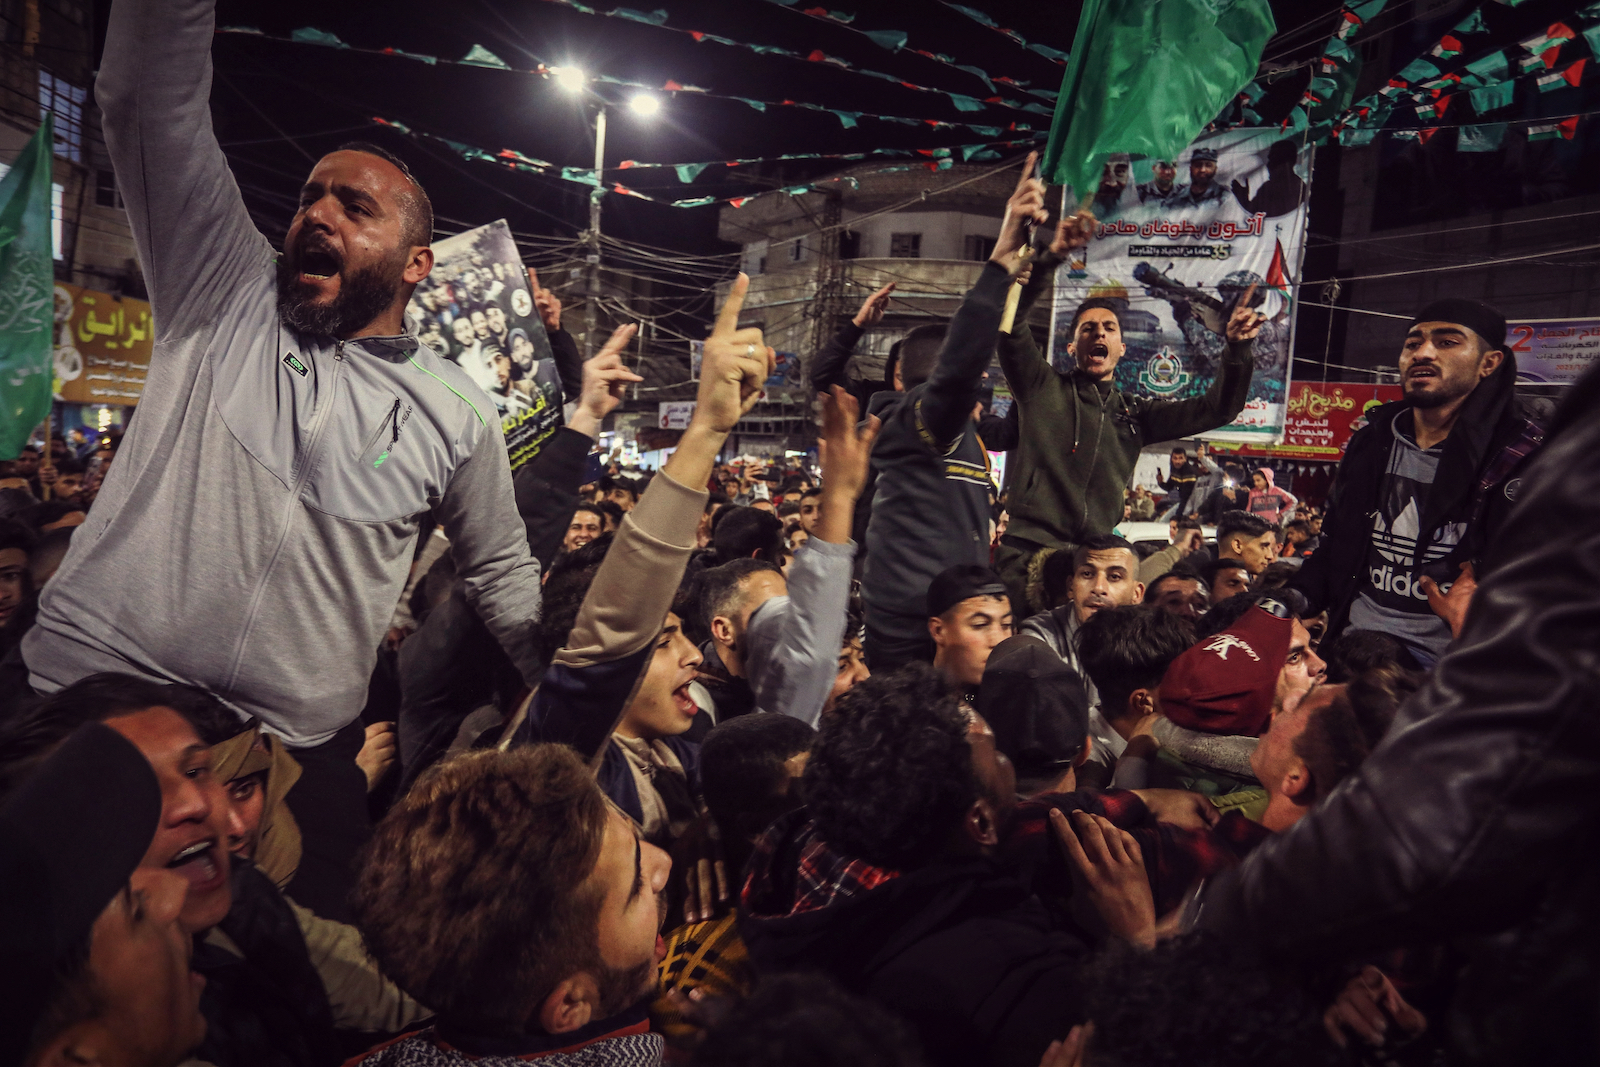 Palestinians celebrating the attack on a synagogue in East Jerusalem